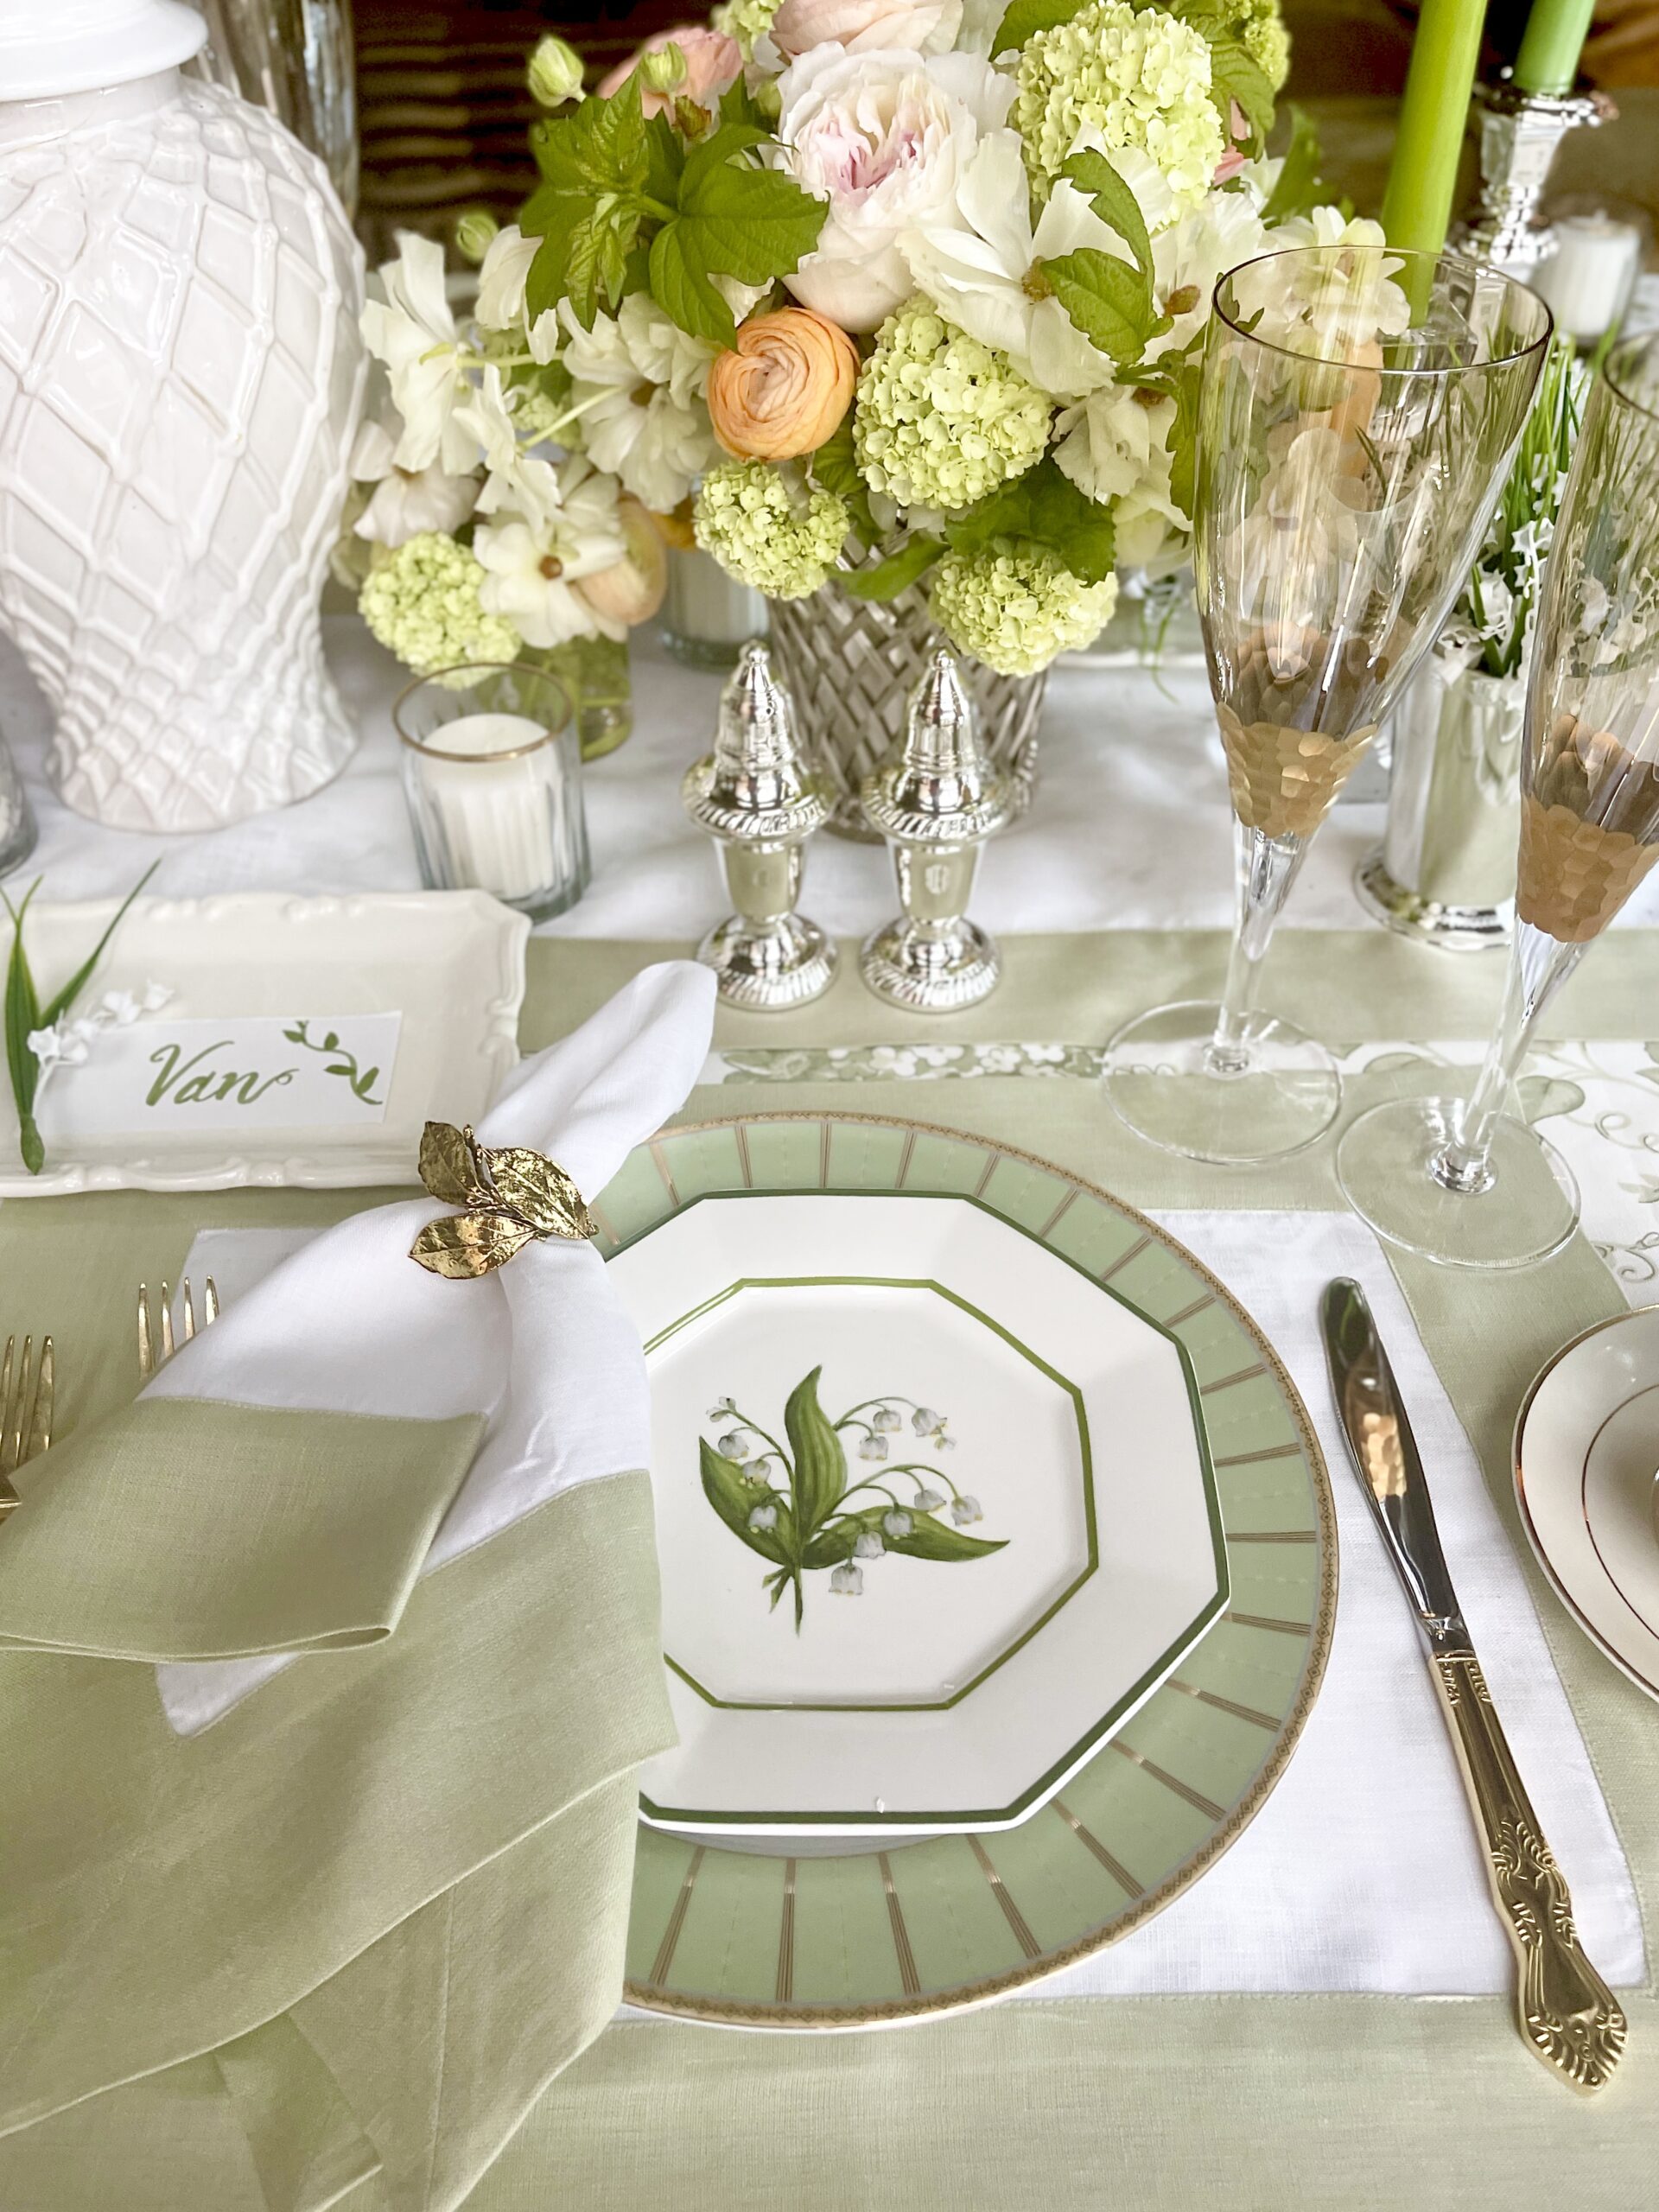 lily of the valley table setting idea